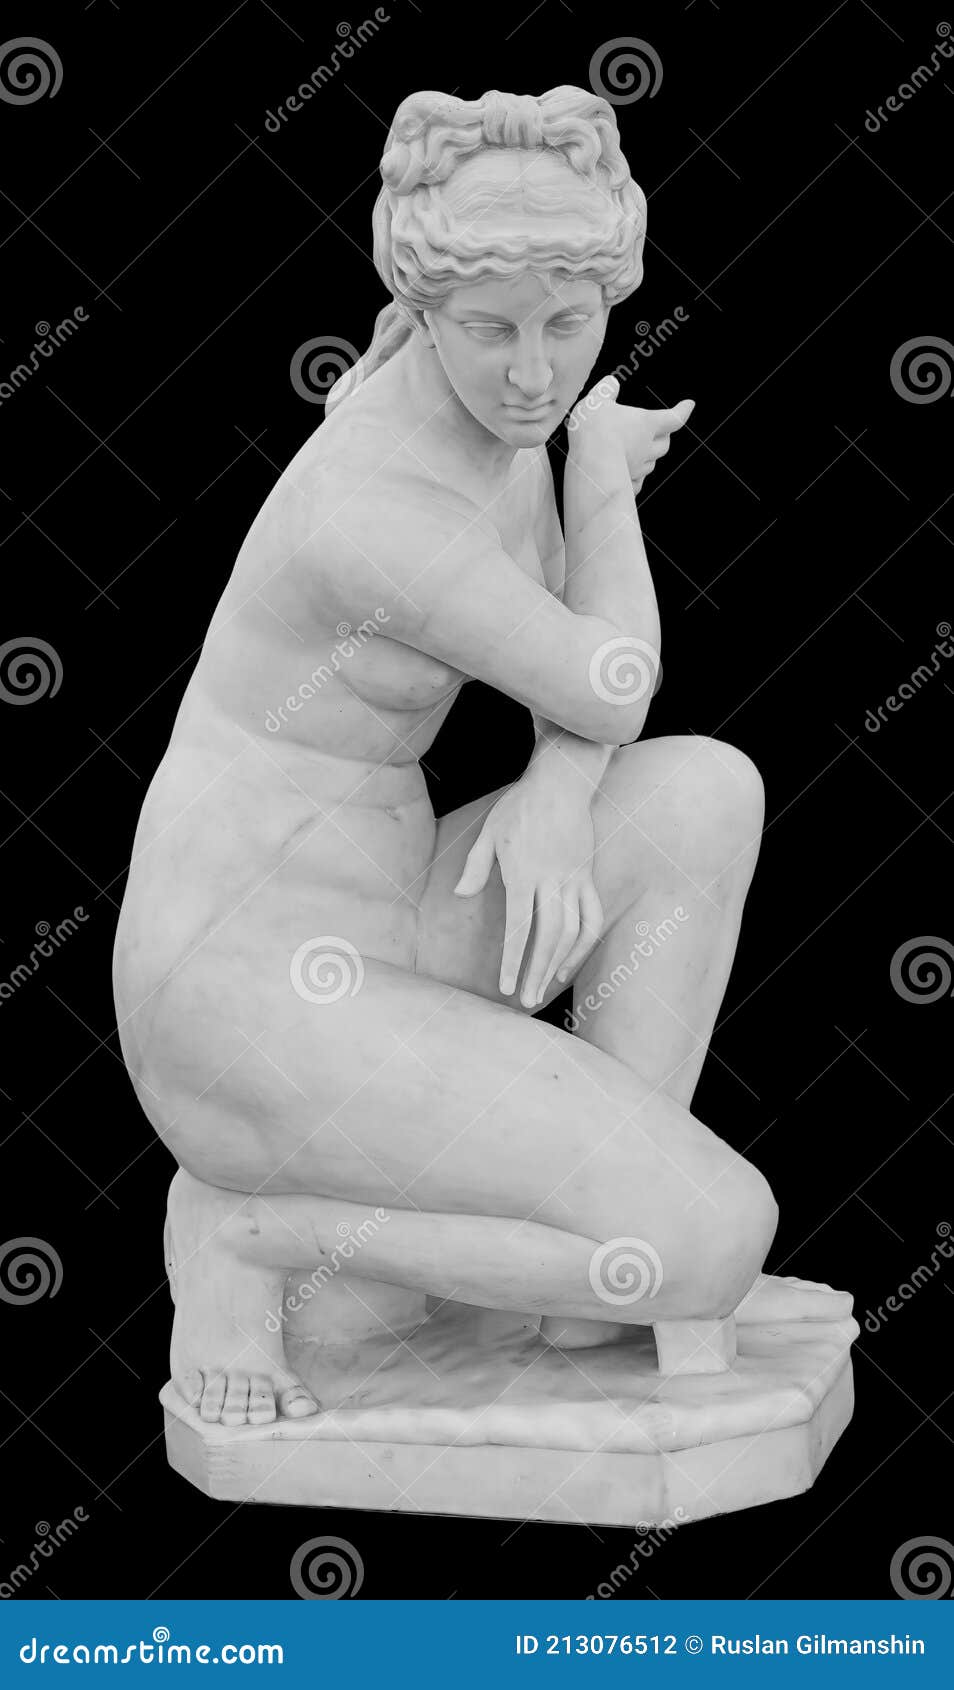 Black porcelain statues nude woman 2 877 Nude Sculpture Photos Free Royalty Free Stock Photos From Dreamstime